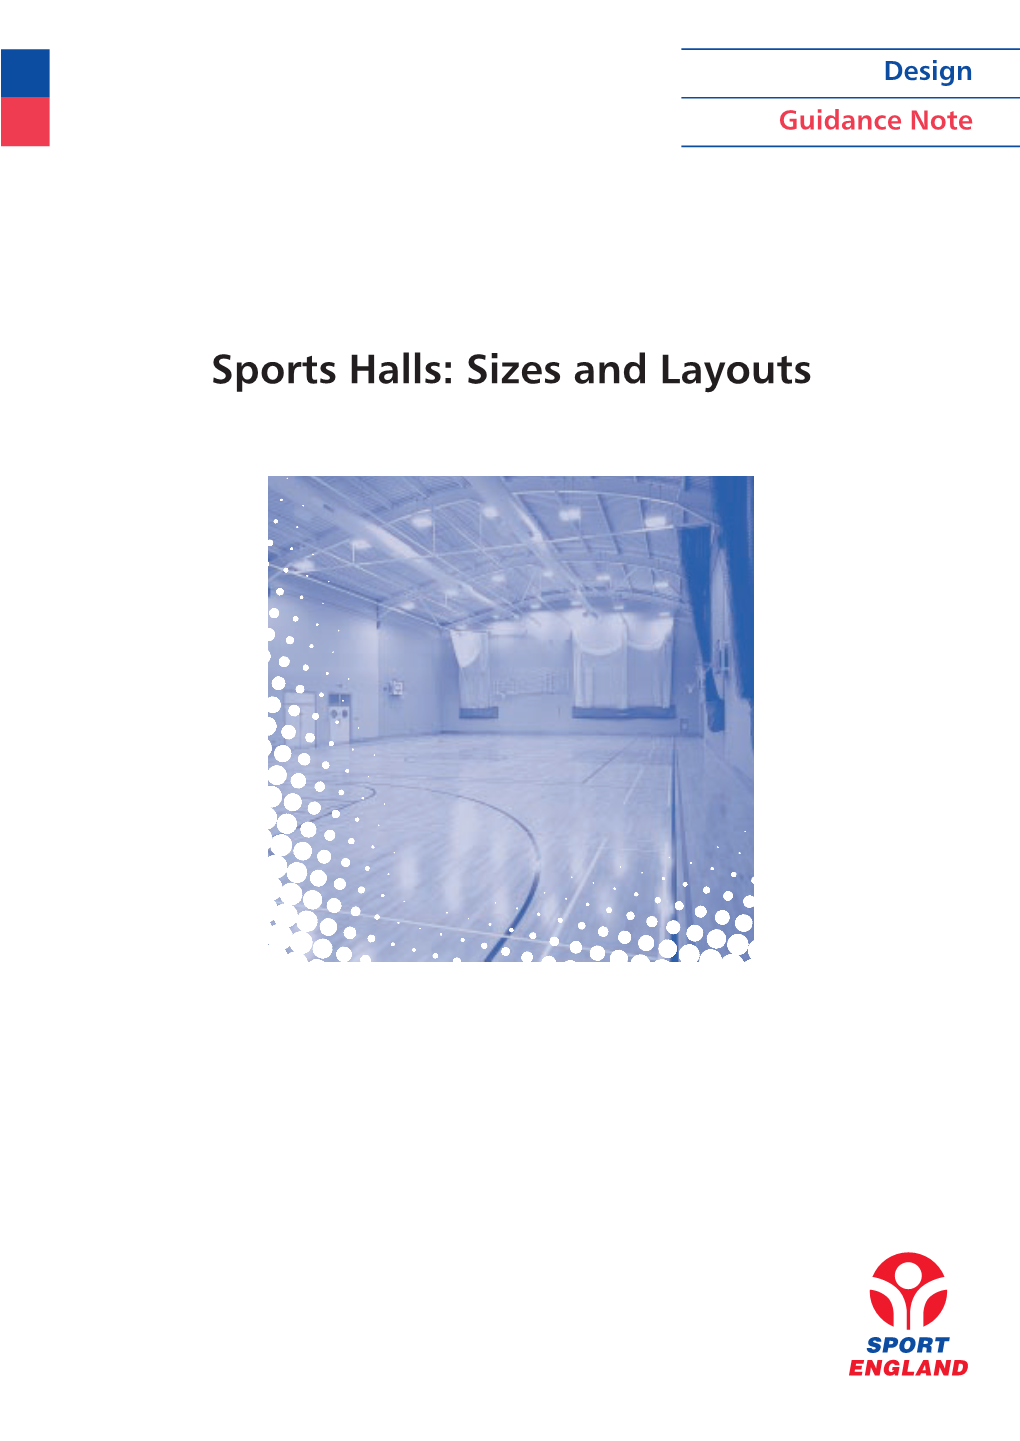 Sports Halls: Sizes and Layouts Guidance Notes